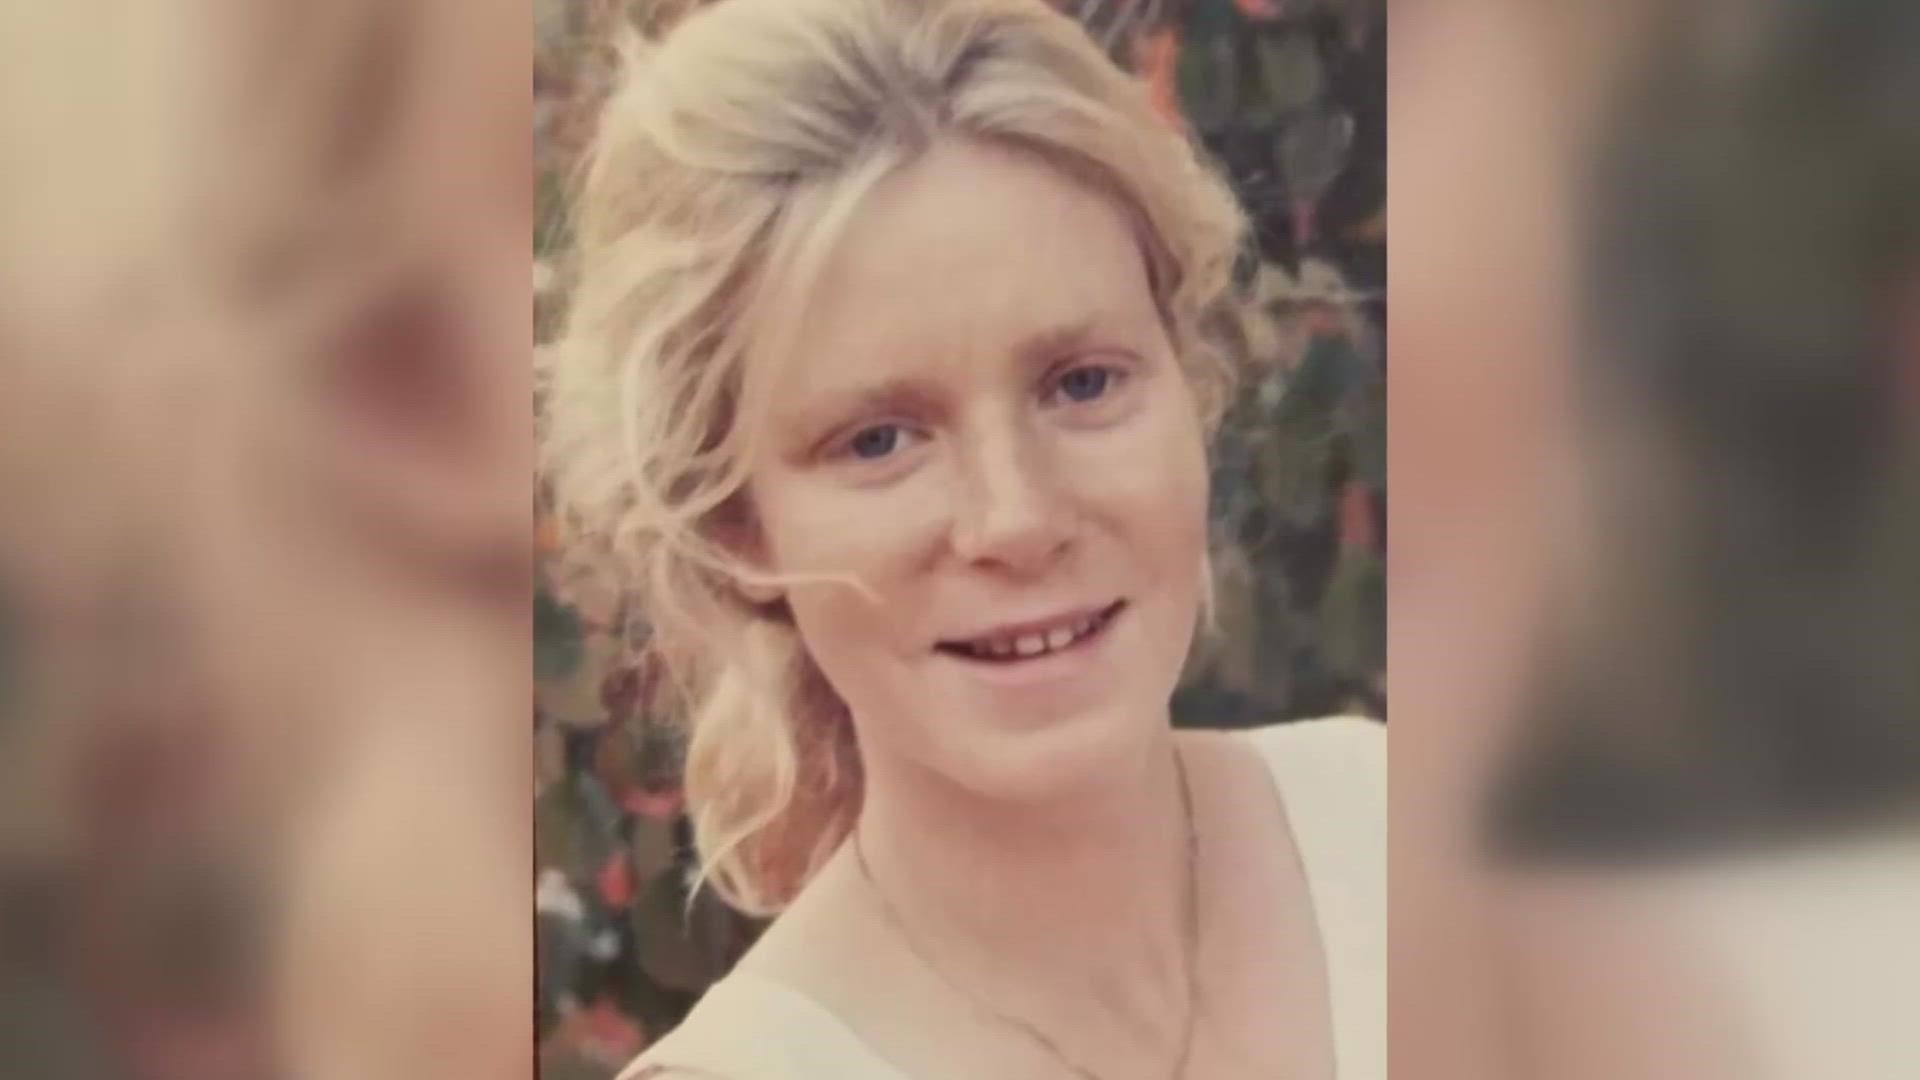 Cold case investigators with San Joaquin County were able to identify the Lady In The Fridge through DNA and family lineage.